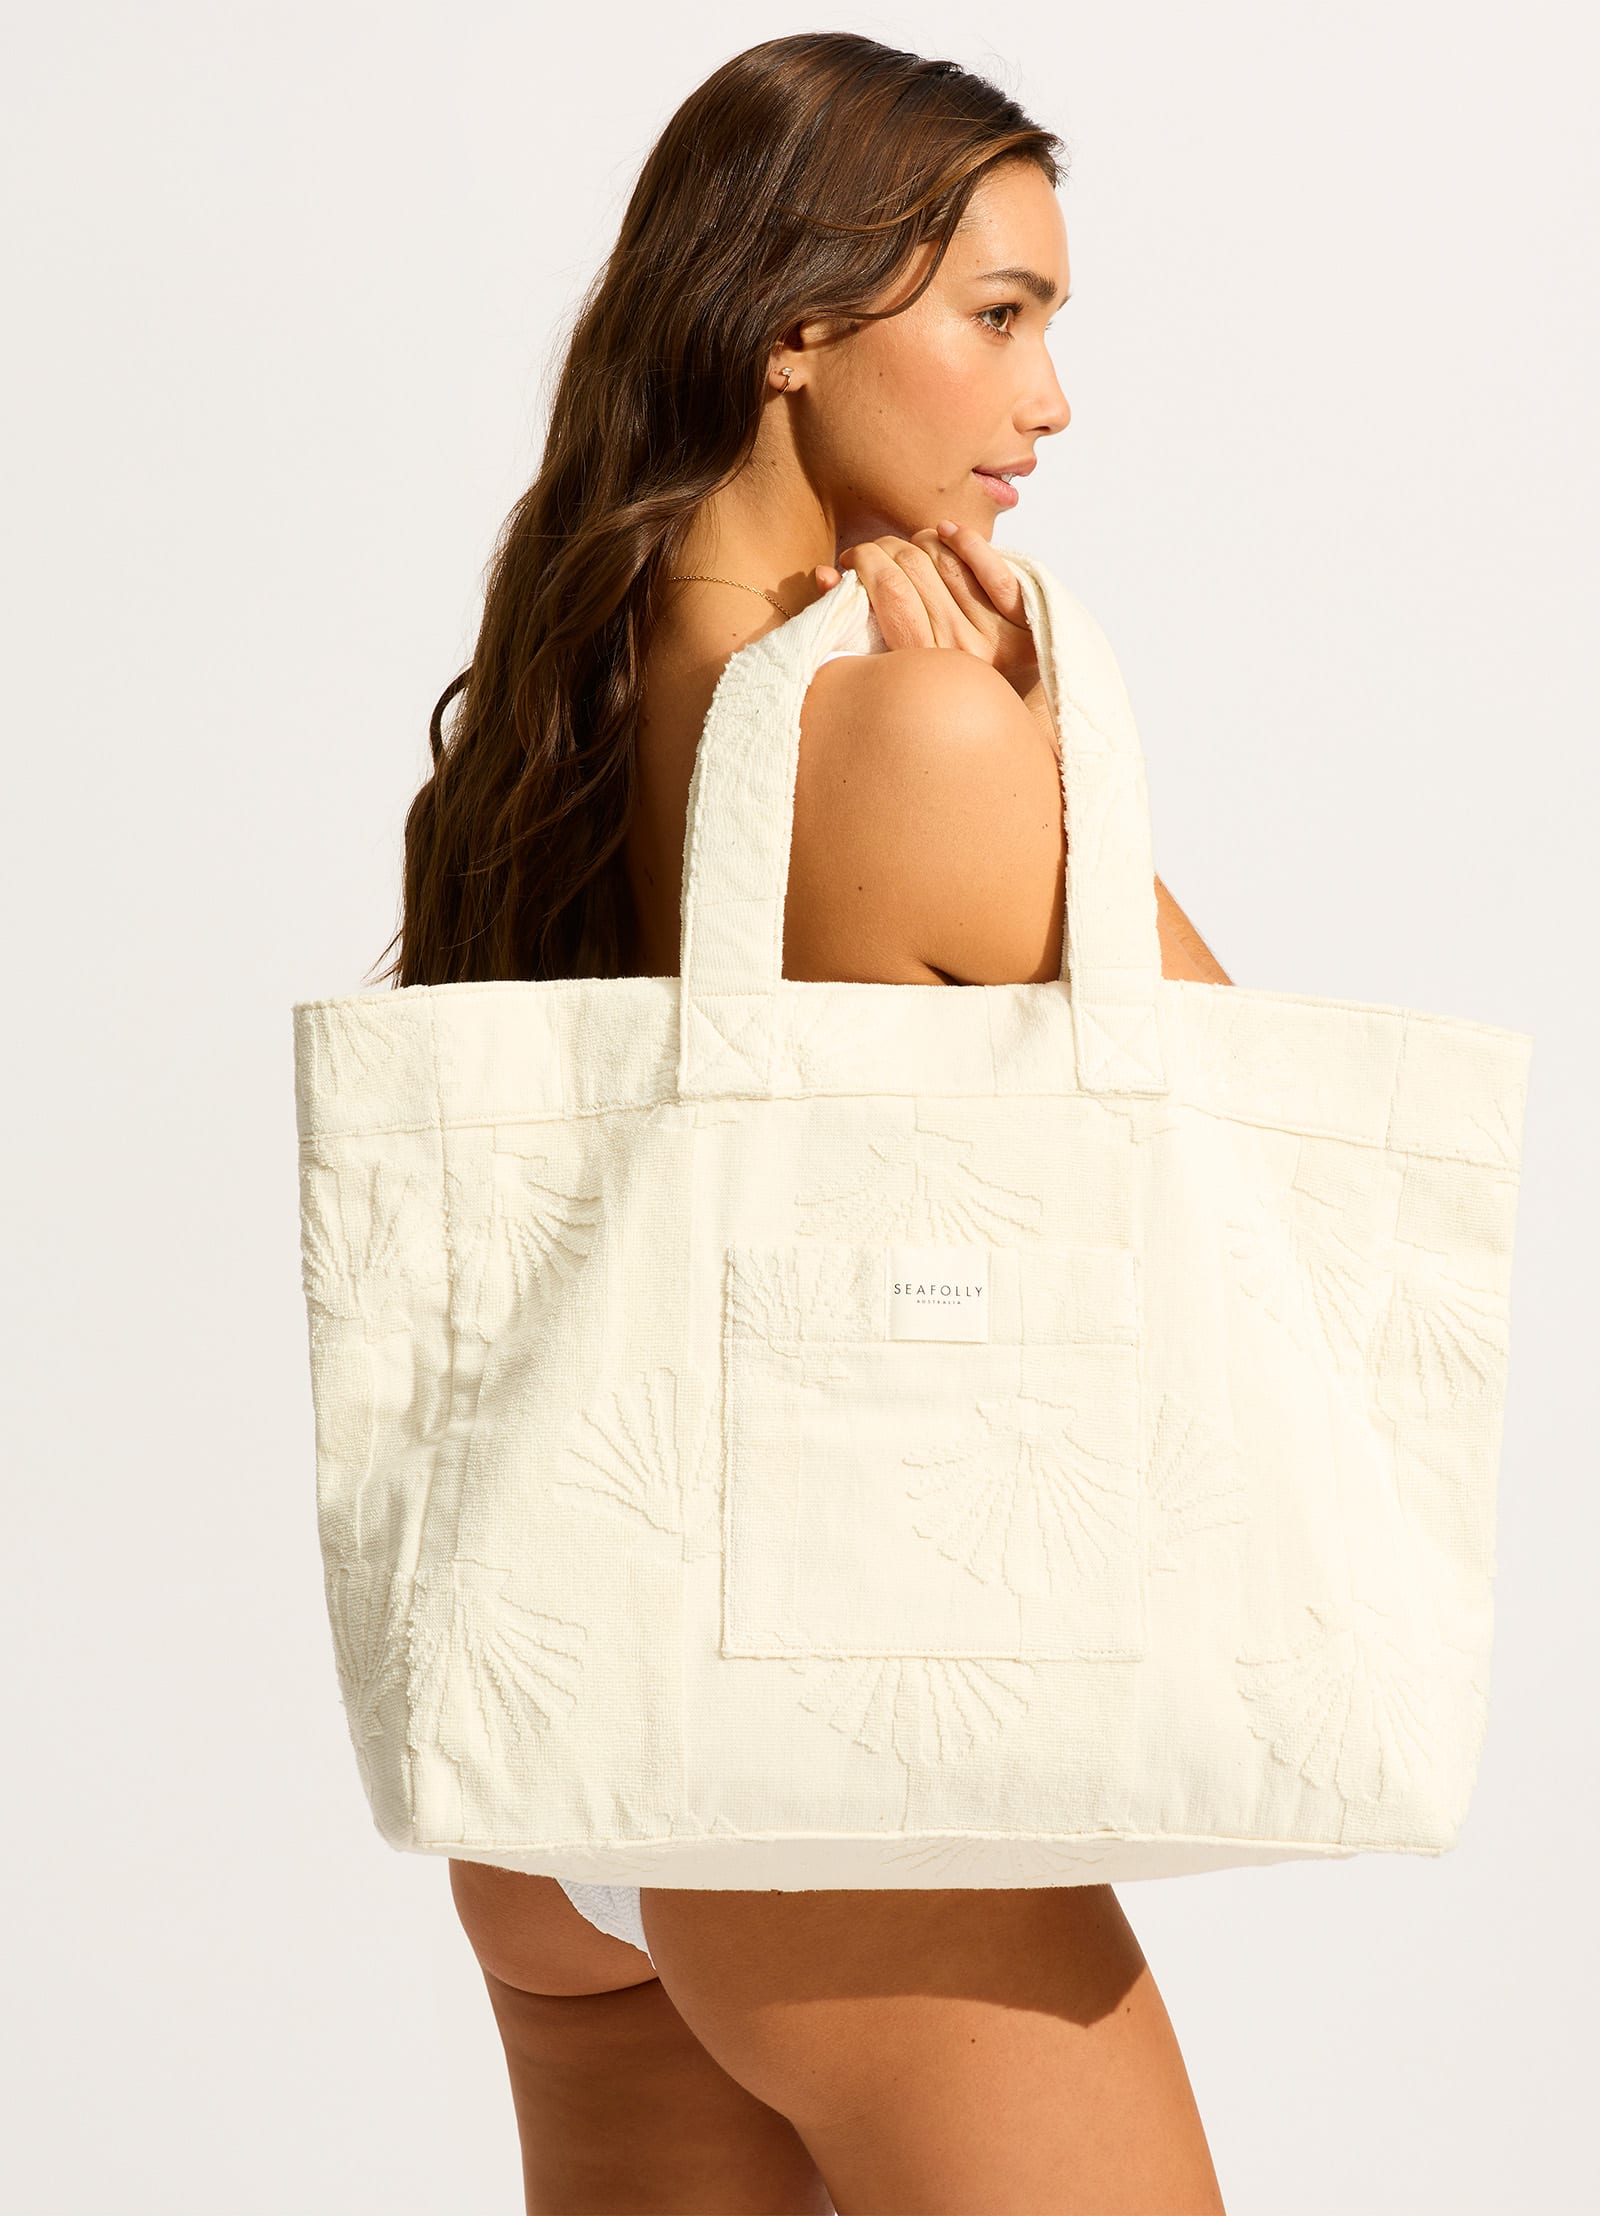 Seafolly Terry Beach Tote Bag - Sand | Shop at Cocon